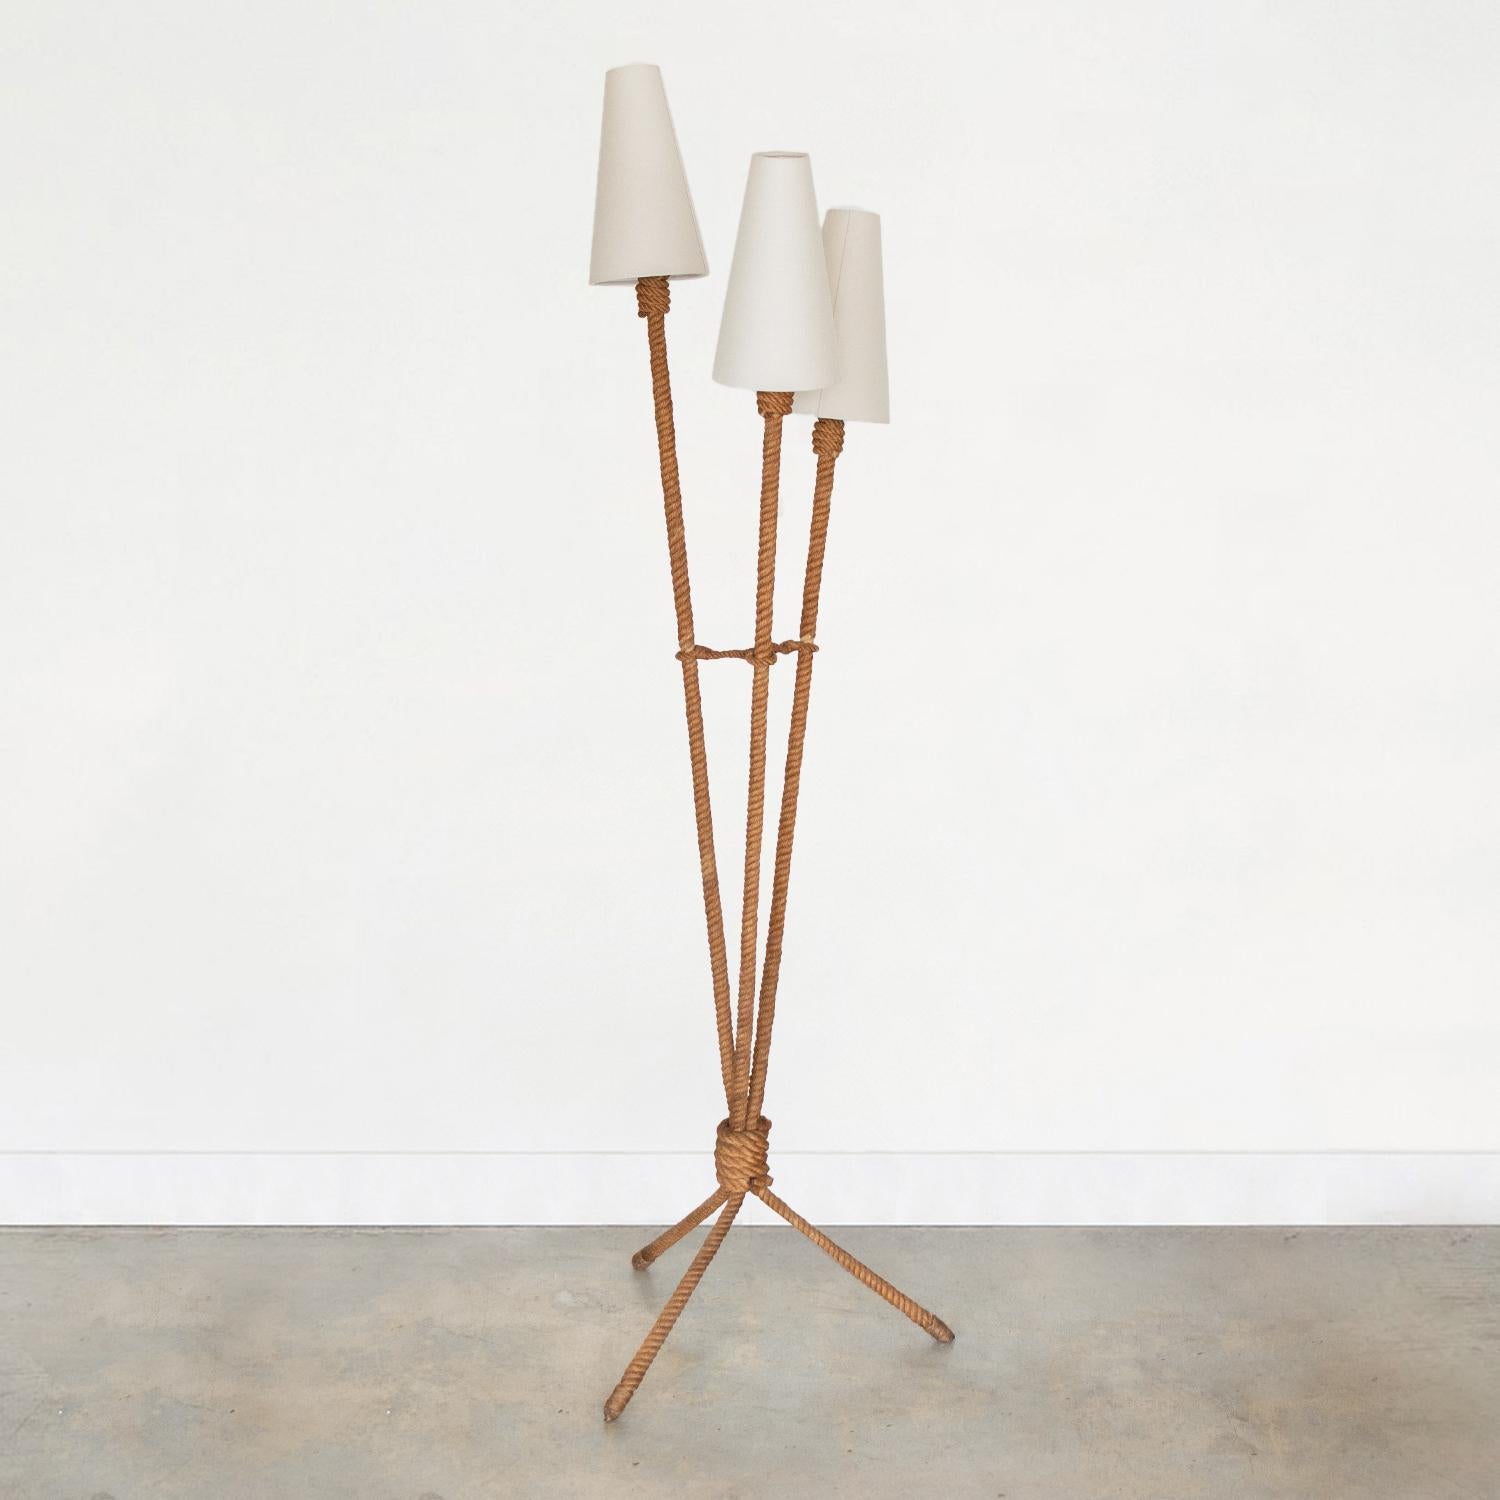 Incredible rope floor lamp by French designers Adrien Aduoux and Freda Minet. Tripod base and three arms with new linen cone shades. Original rope shows great patina and age. Newly re-wired. Takes 3 E12 base bulbs, 40 W or higher using